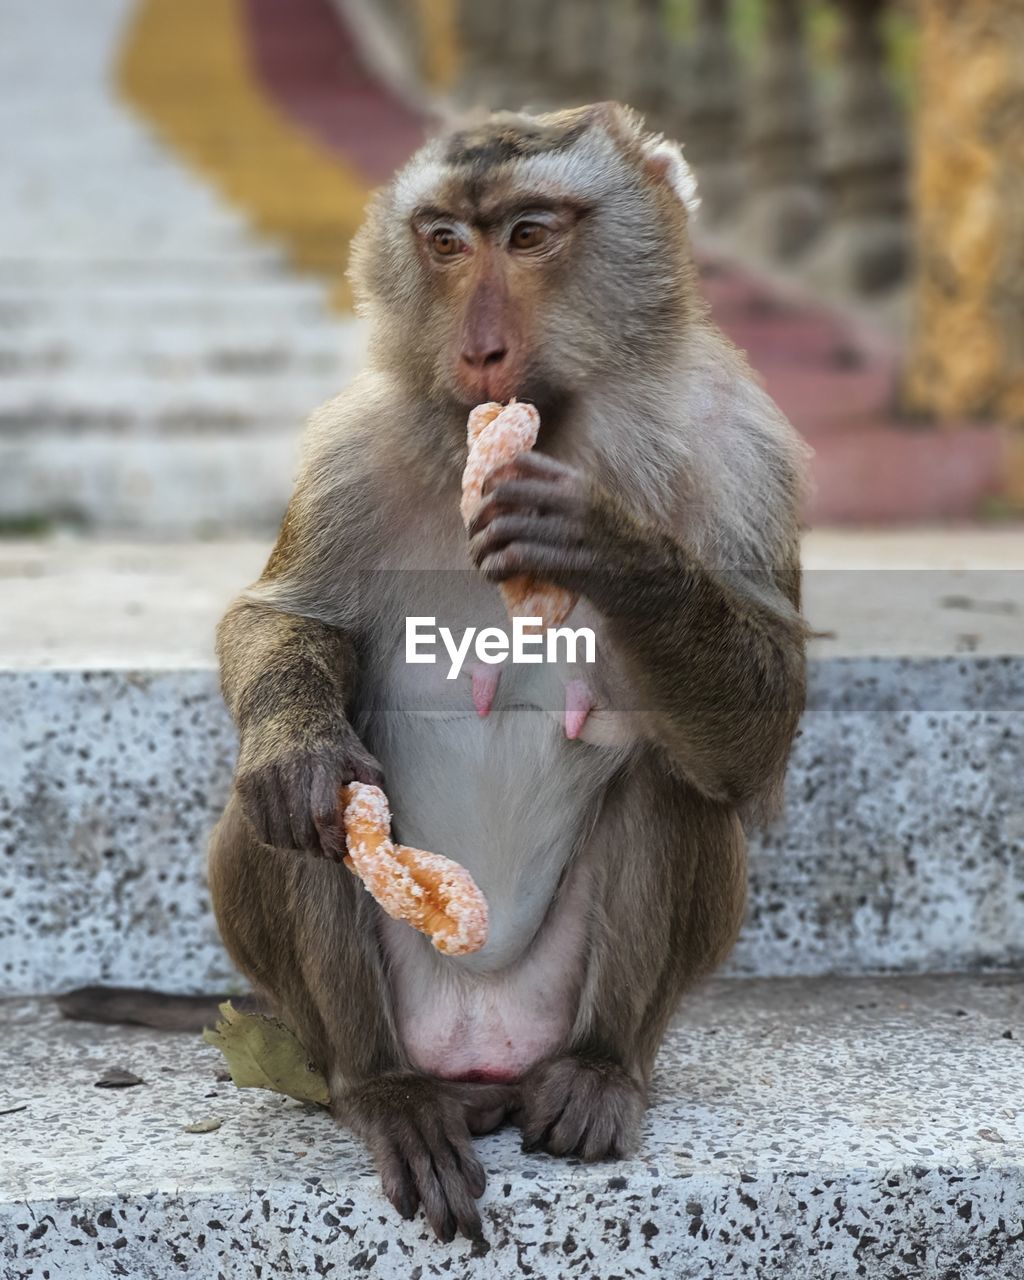 A monkey is eating food.